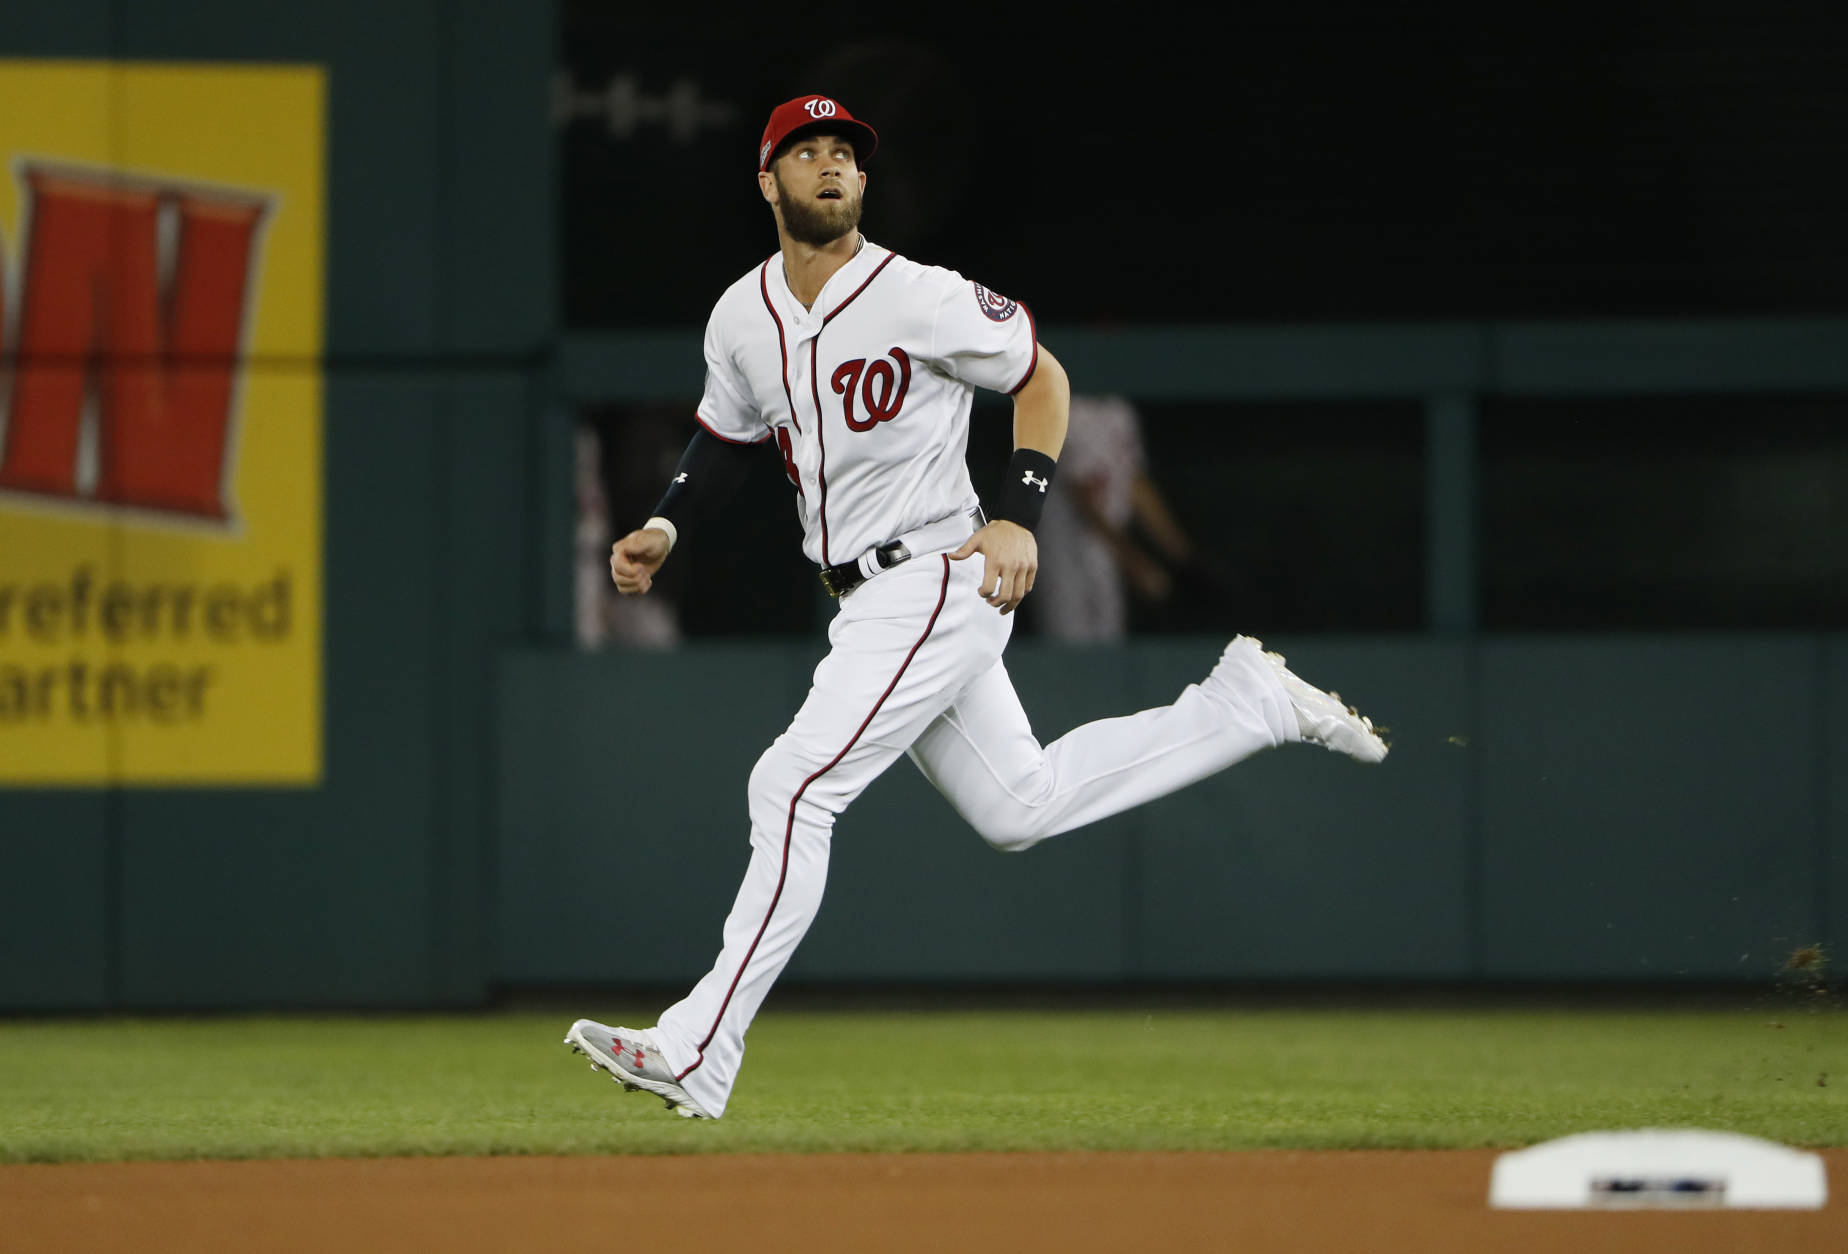 Washington Nationals right fielder Bryce Harper warms up before Game 5 of baseball's National League Division Series, against the Los Angeles Dodgers at Nationals Park, Thursday, Oct. 13, 2016, in Washington. (AP Photo/Pablo Martinez Monsivais)